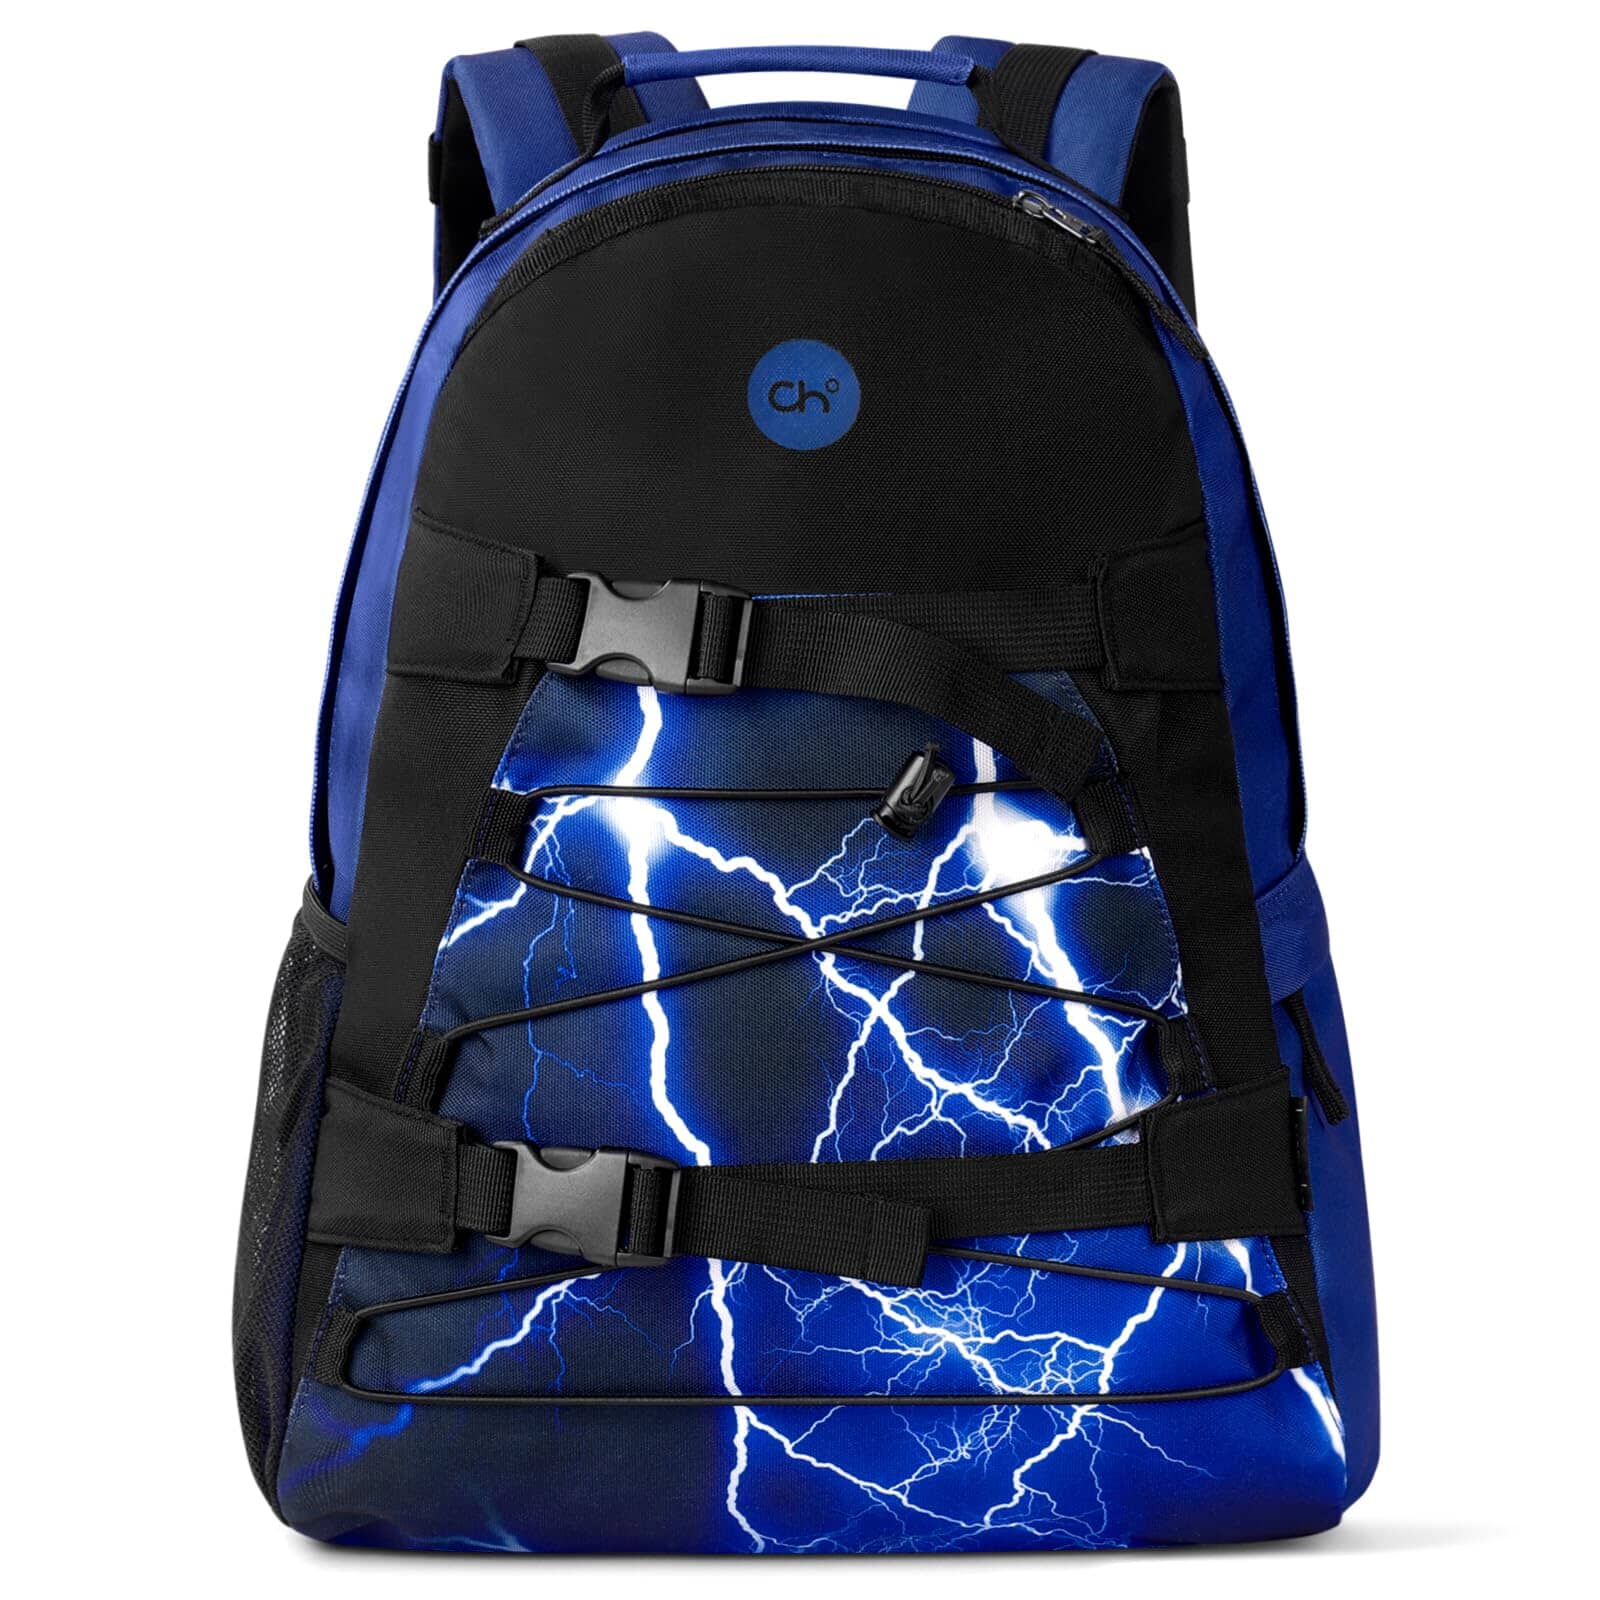 Choco Mocha Boys Lightning Backpack for Elementary Middle School, Blue Large Backpack for Kids Teen Boys, 18 Inch chocomochakids 